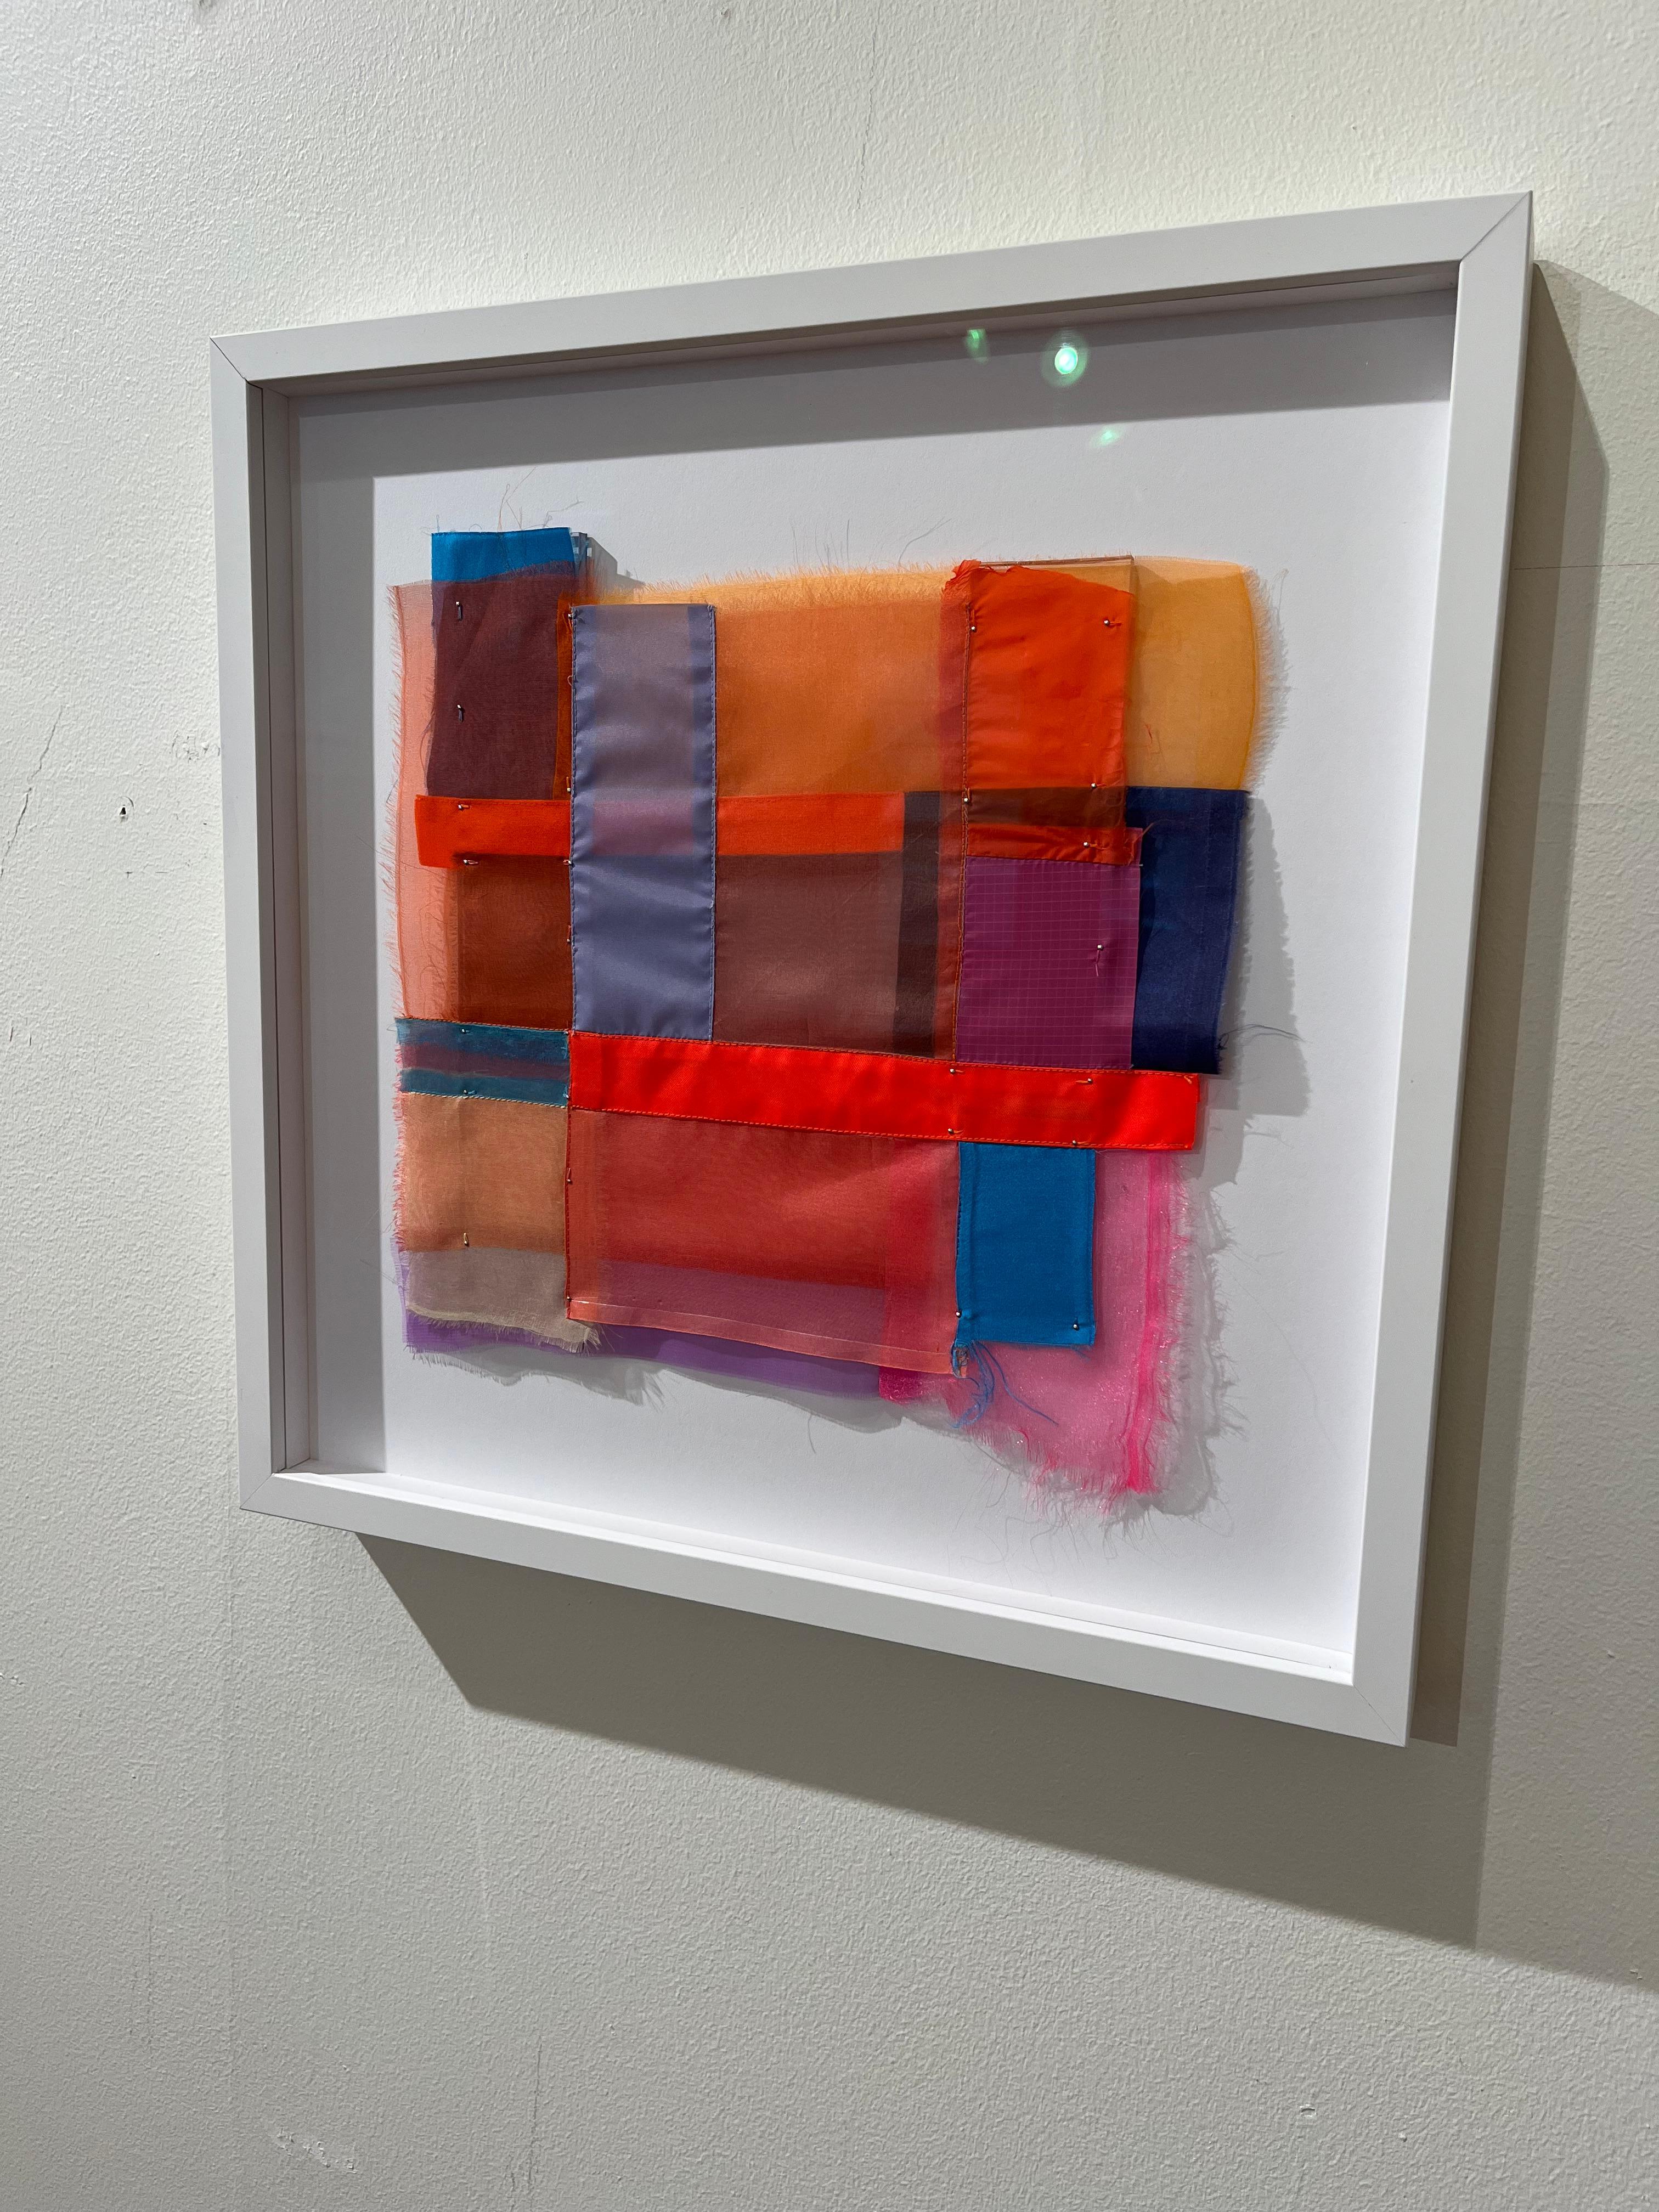 Linda Schmidt’s fabric sculptures intertwine public and private, luxury and common. There is a sense of egalitarianism present in both the way Schmidt sources and arranges her fabrics; thrifted fabrics and high-quality pieces are viewed with an